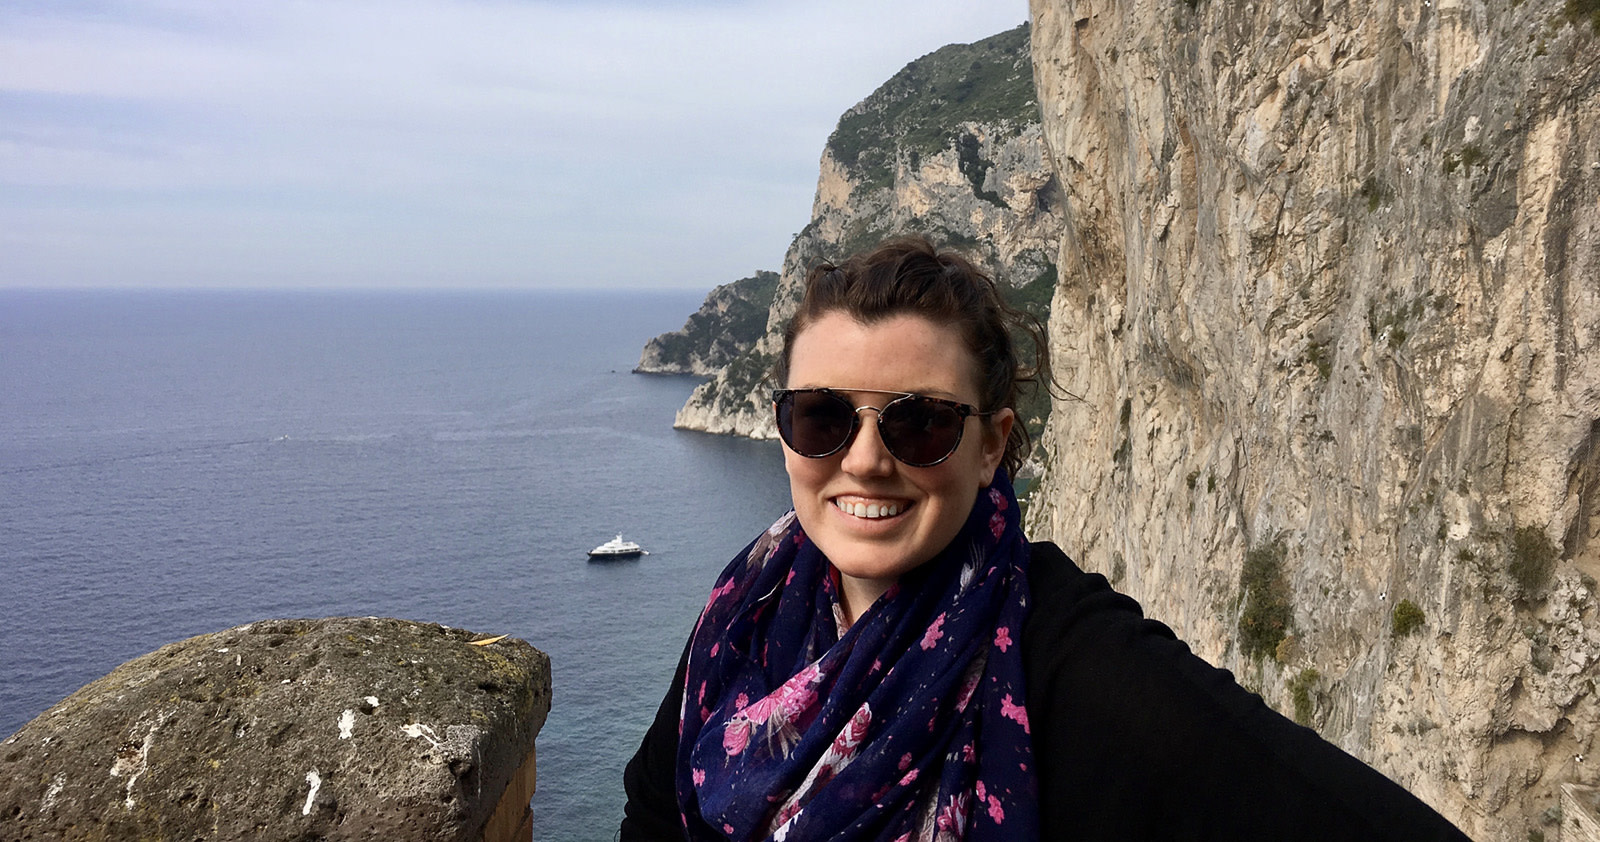 My Name Is Kristina Gass — This Is Why I Joined Aha!